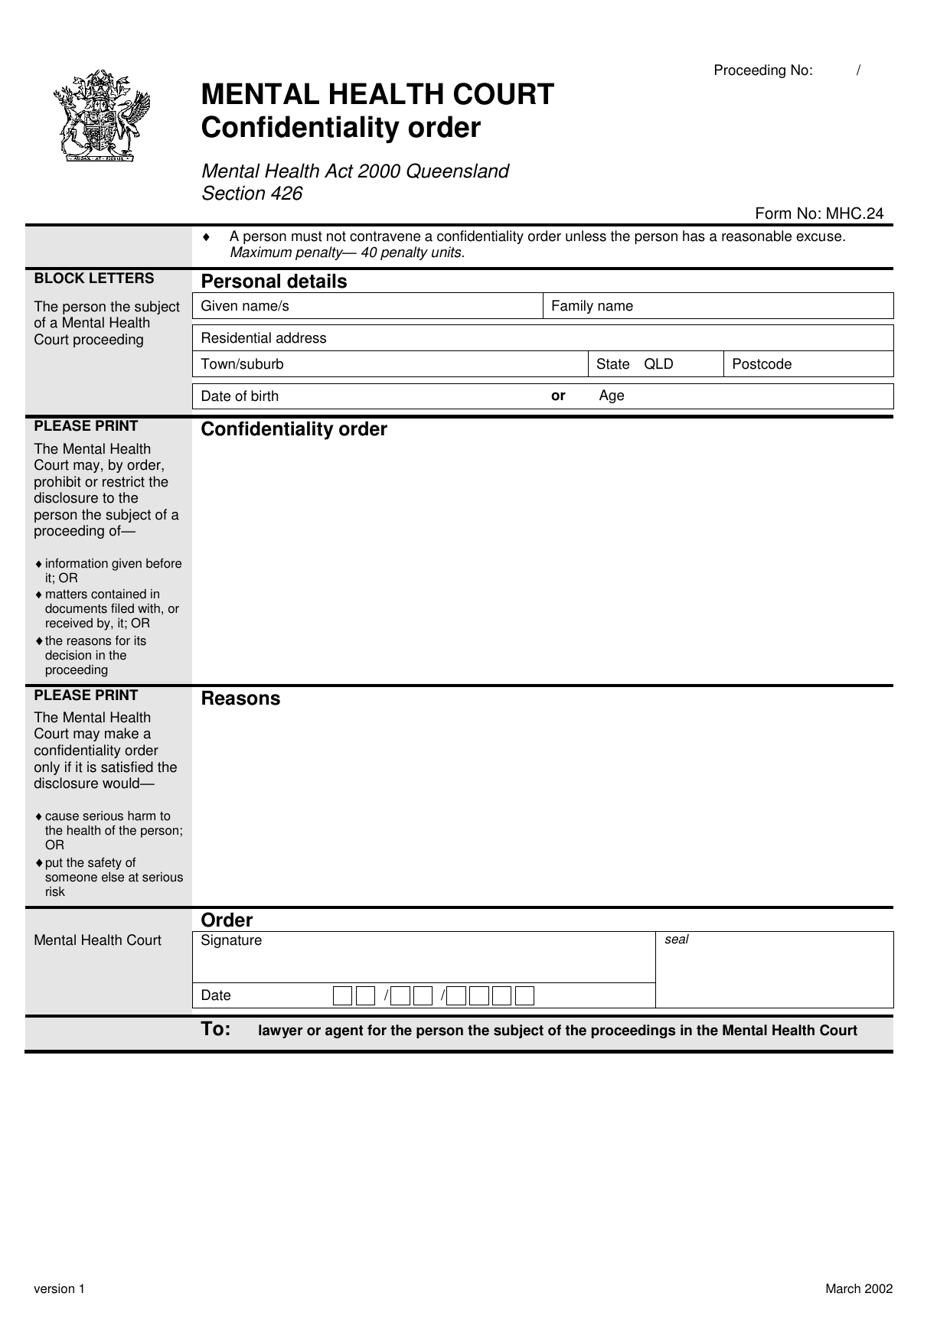 Form 24 Confidentiality Order - Queensland, Australia, Page 1